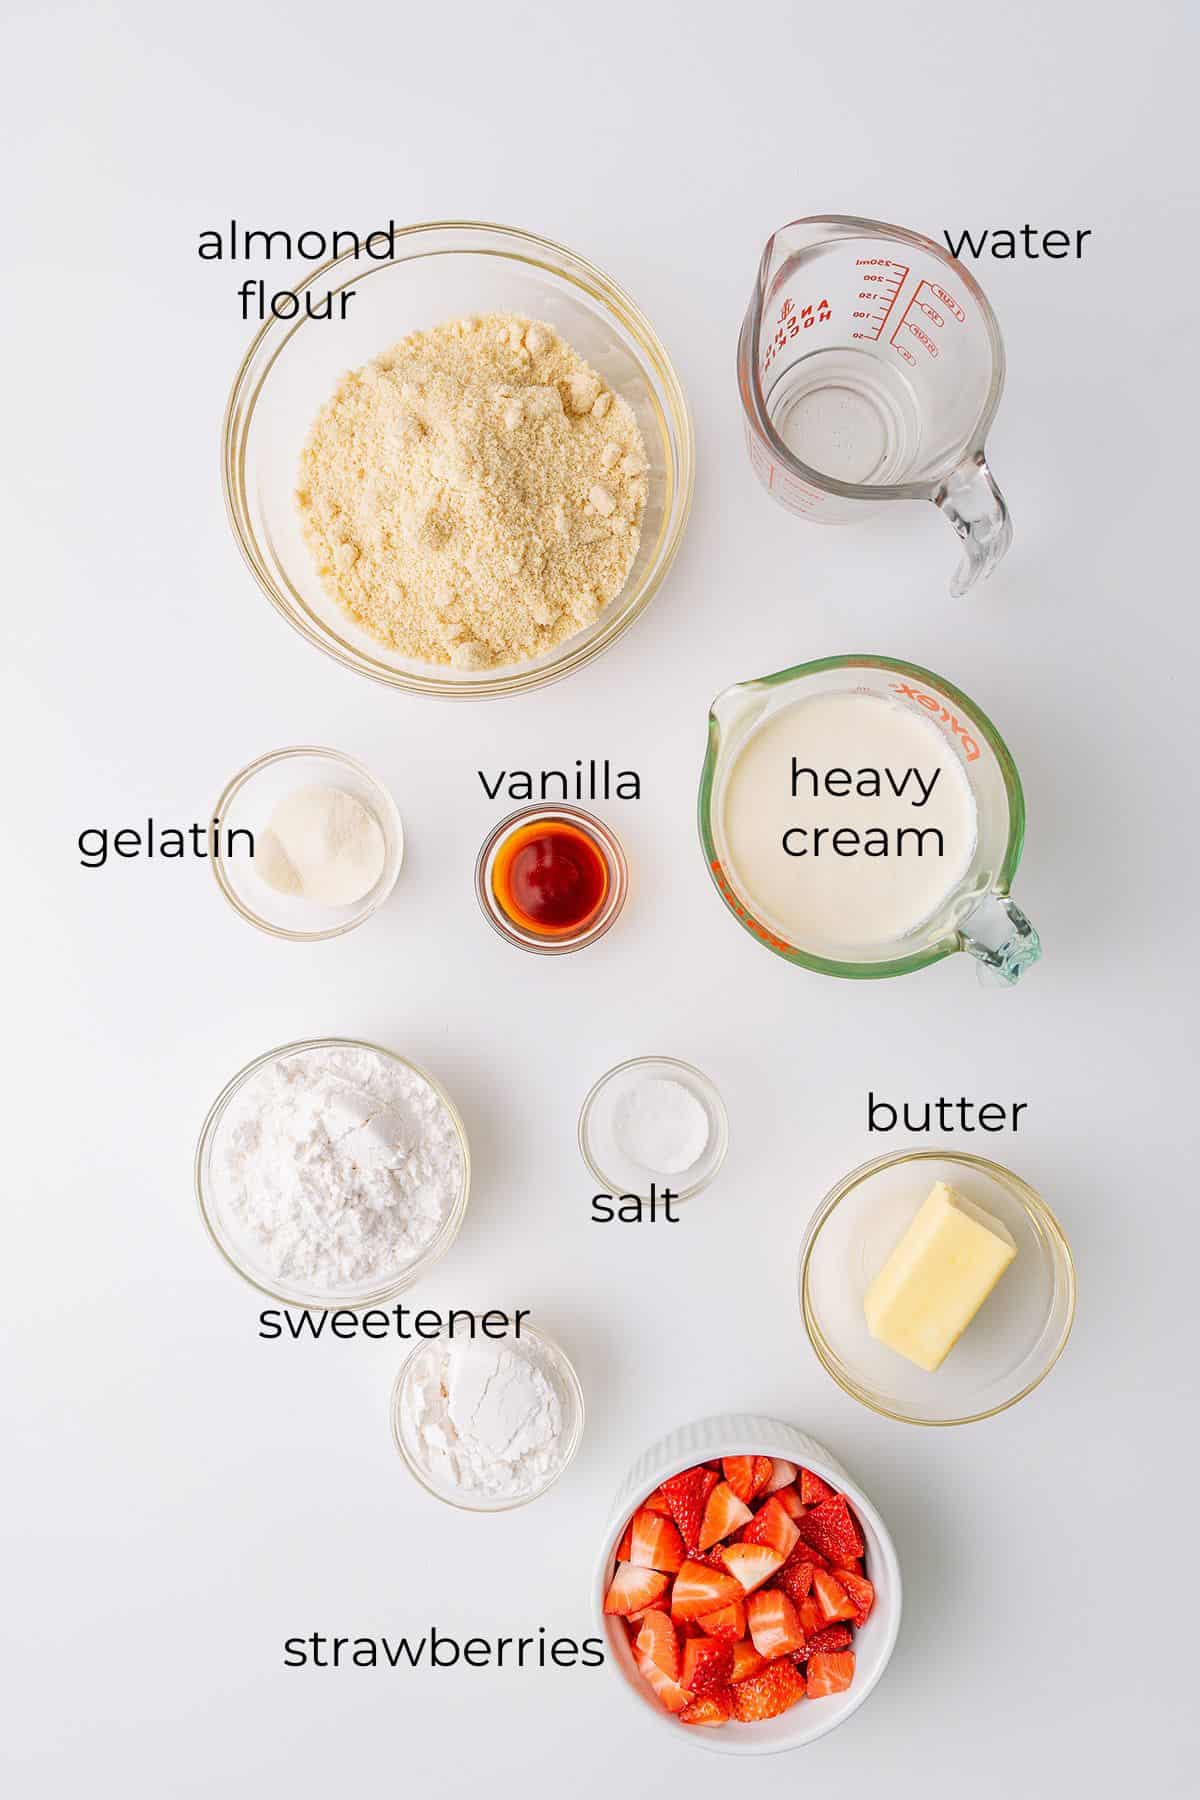 Top down image of ingredients needed for Keto Strawberry Cream Pie.